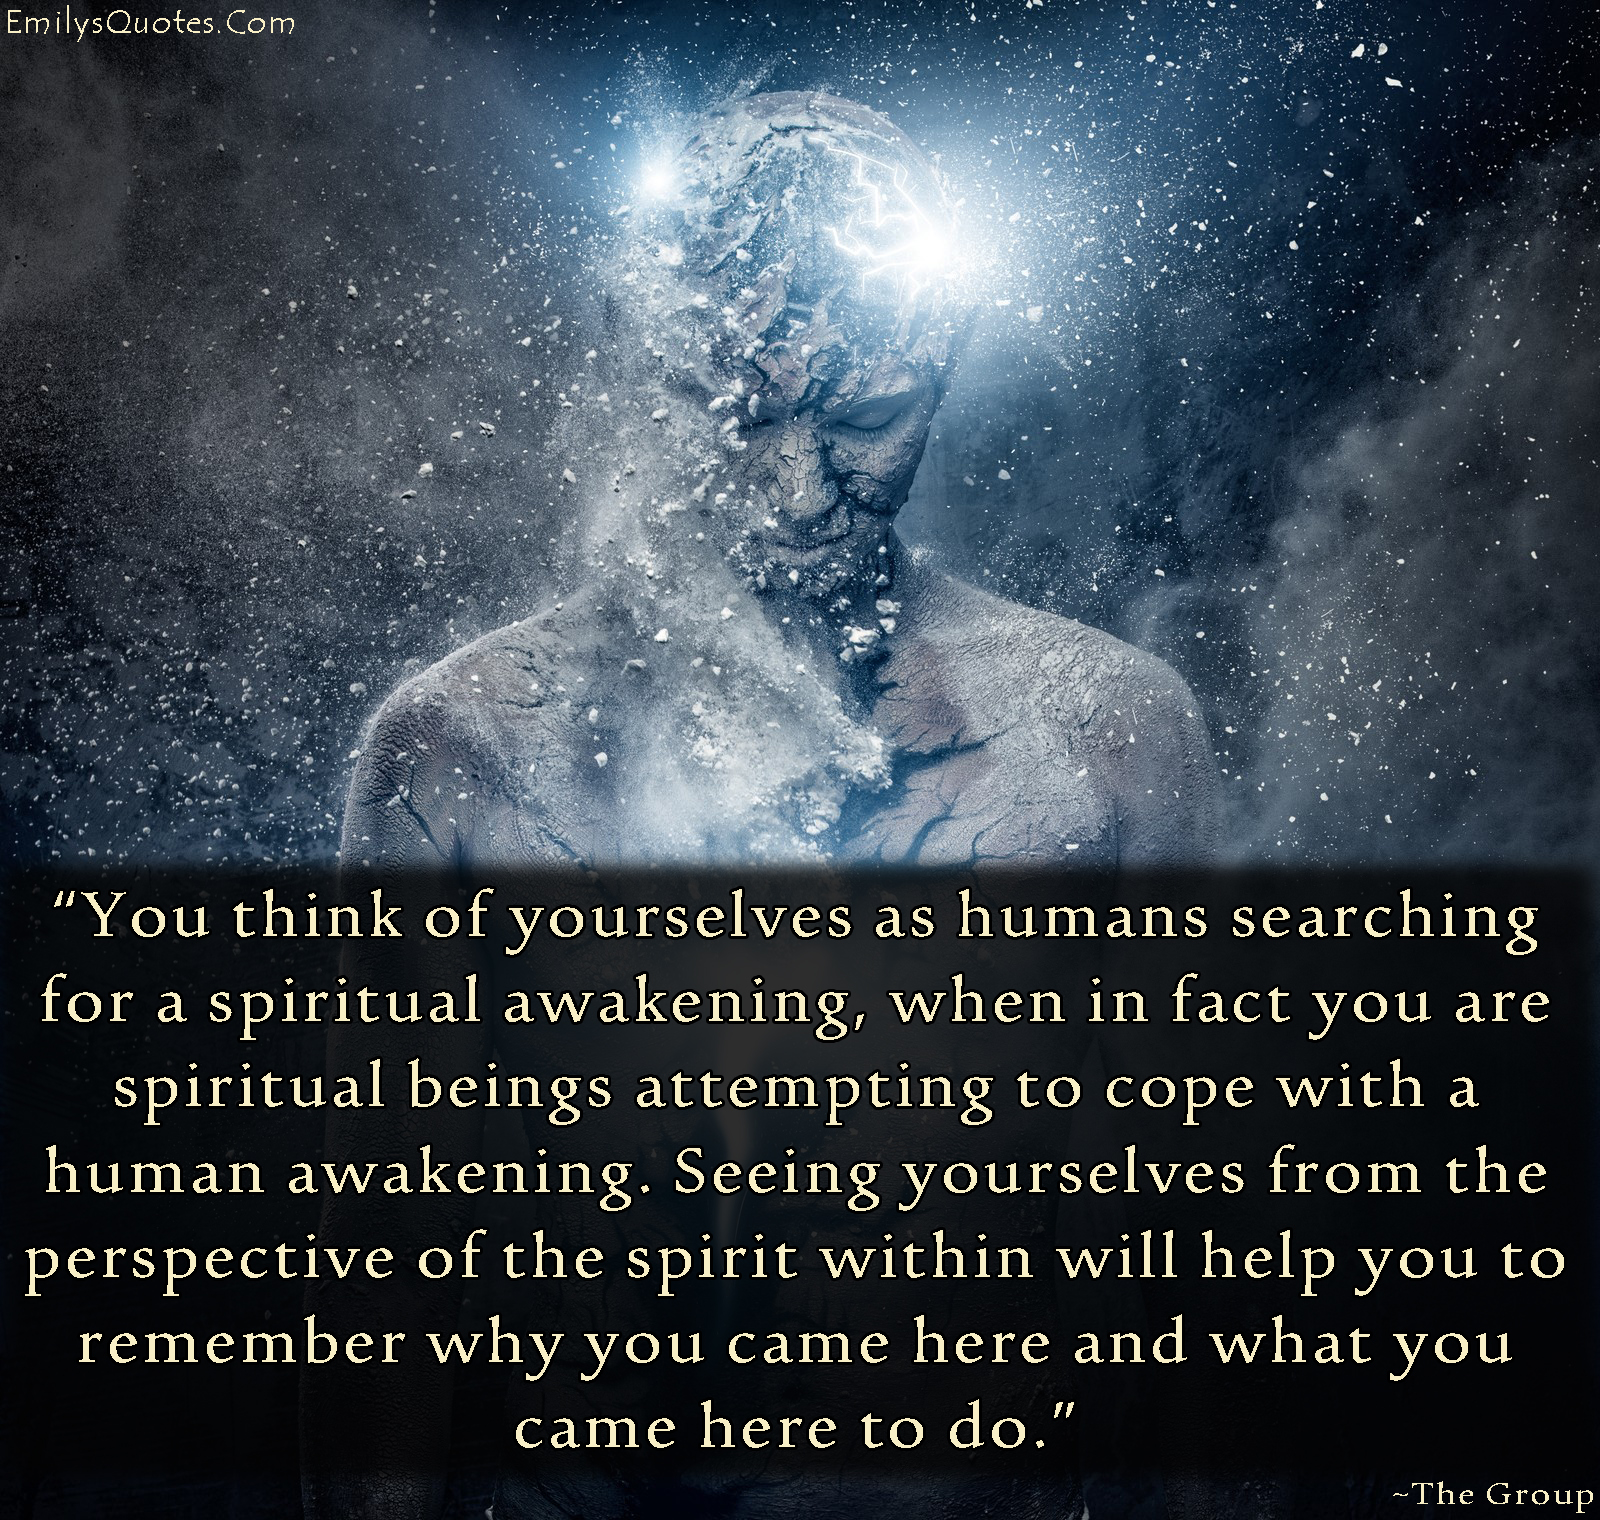 You think of yourselves as humans searching for a spiritual awakening, when in fact you are spiritual beings attempting to cope with a human awakening. Seeing yourselves from the perspective of the spirit within will help you to remember why you came here and what you came here to do